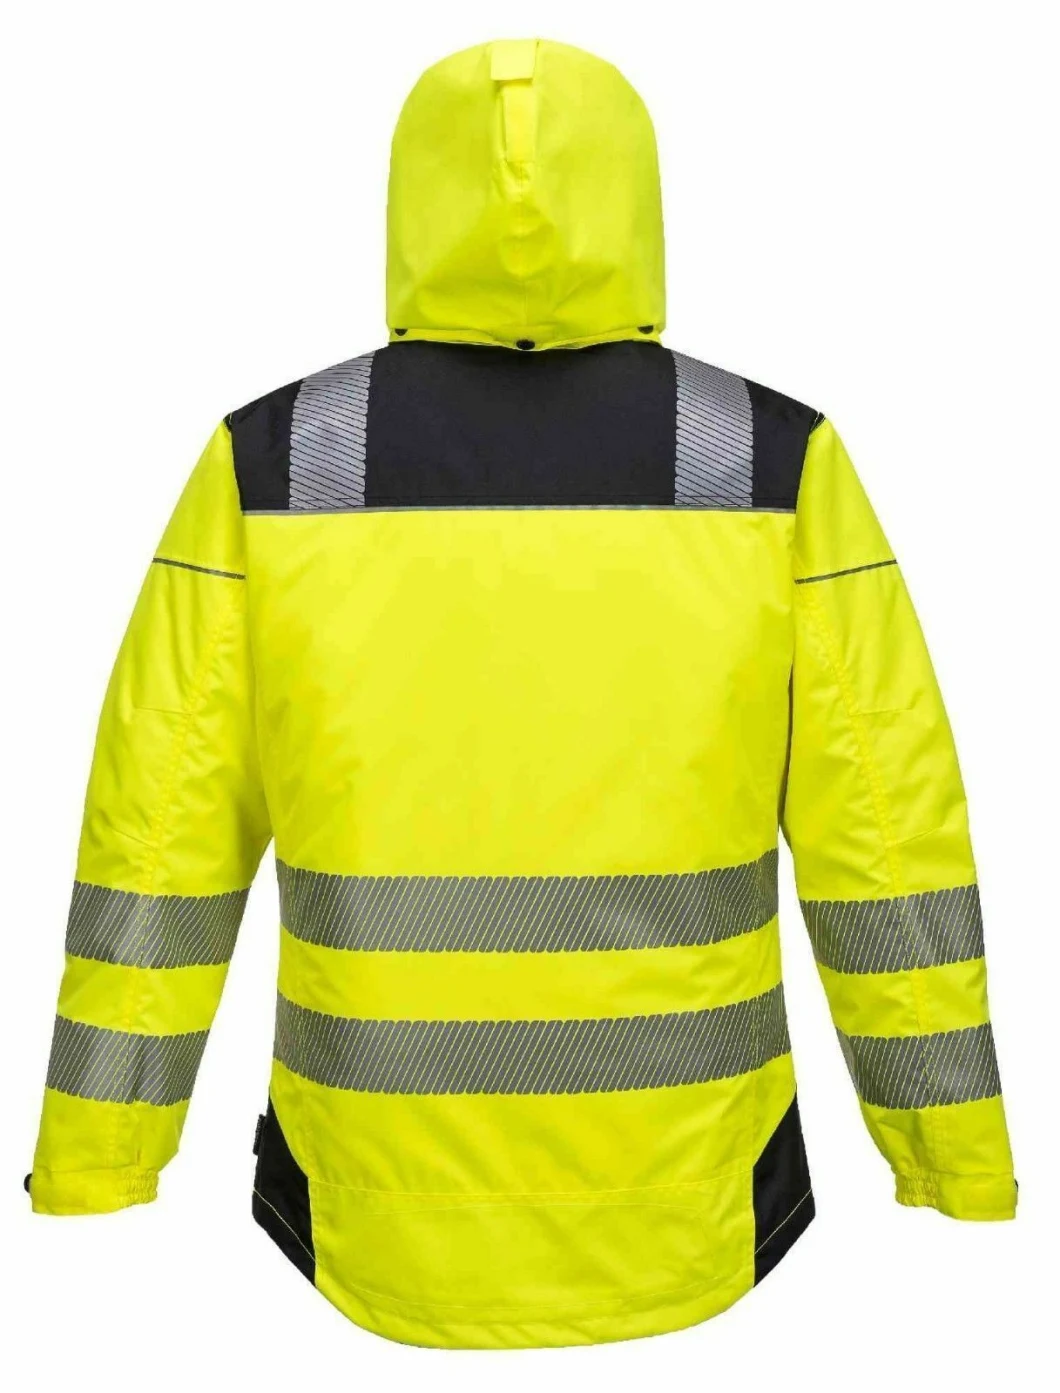 En20471 Factory Supply High Visibility Safety Working Reflective Safety Jackets